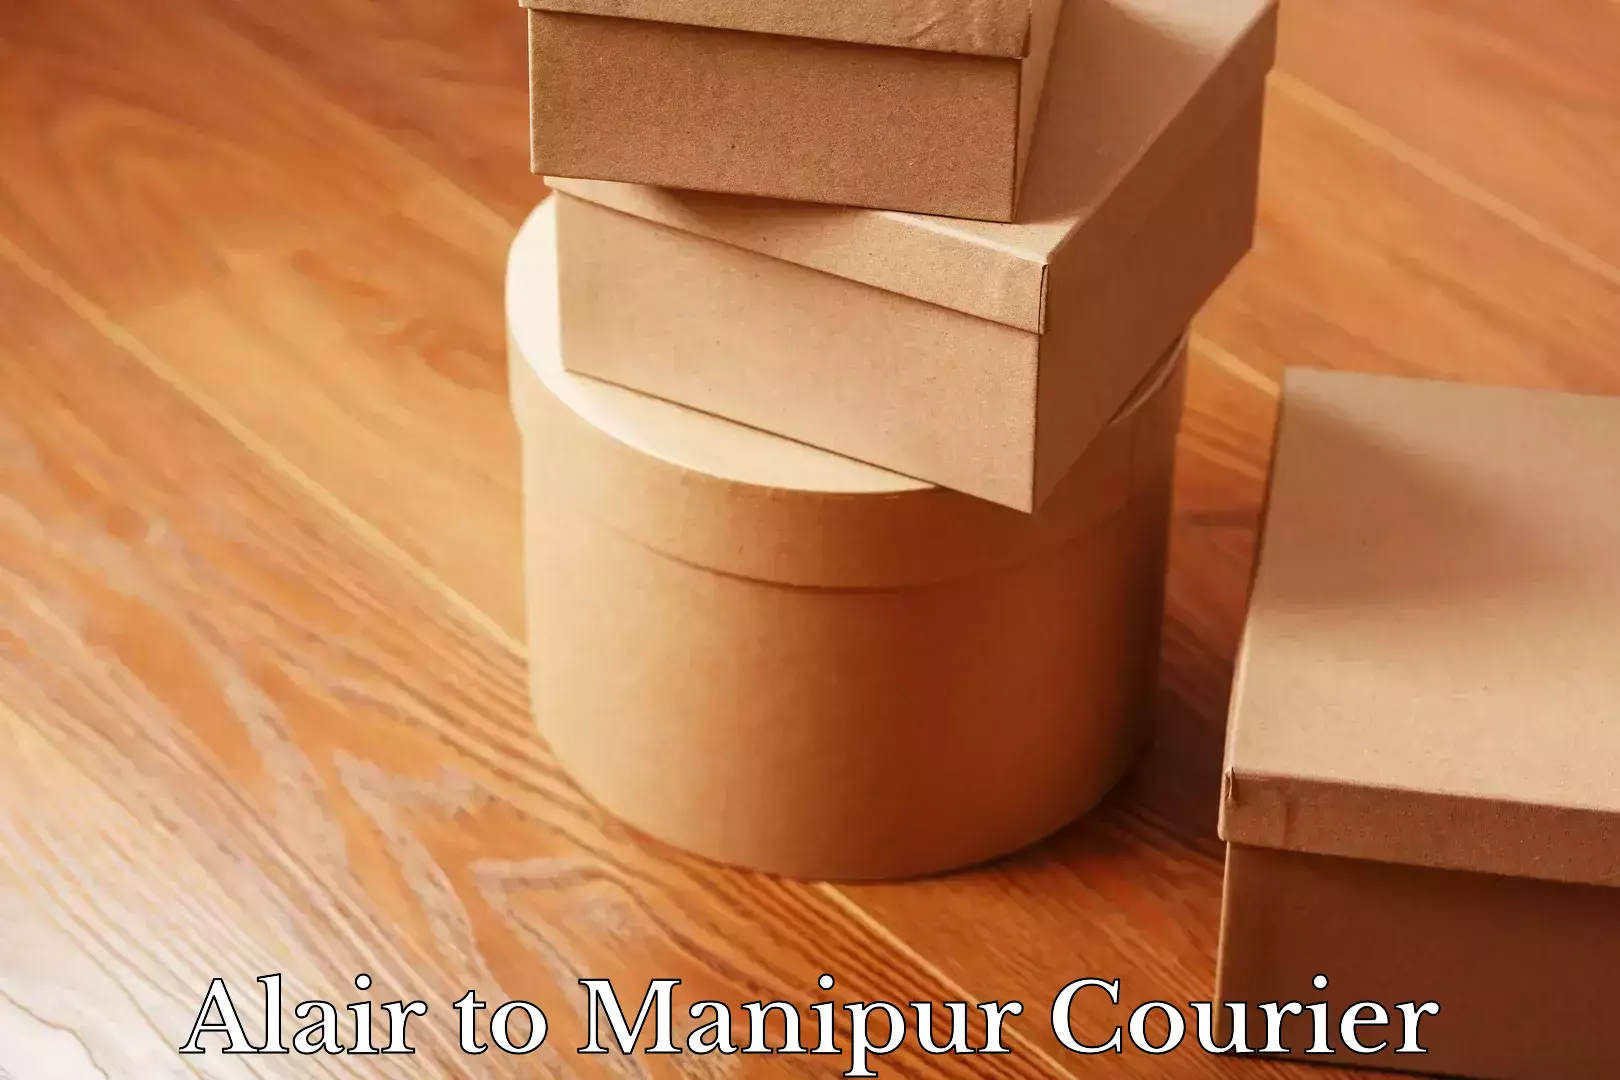 Custom courier packaging Alair to Manipur